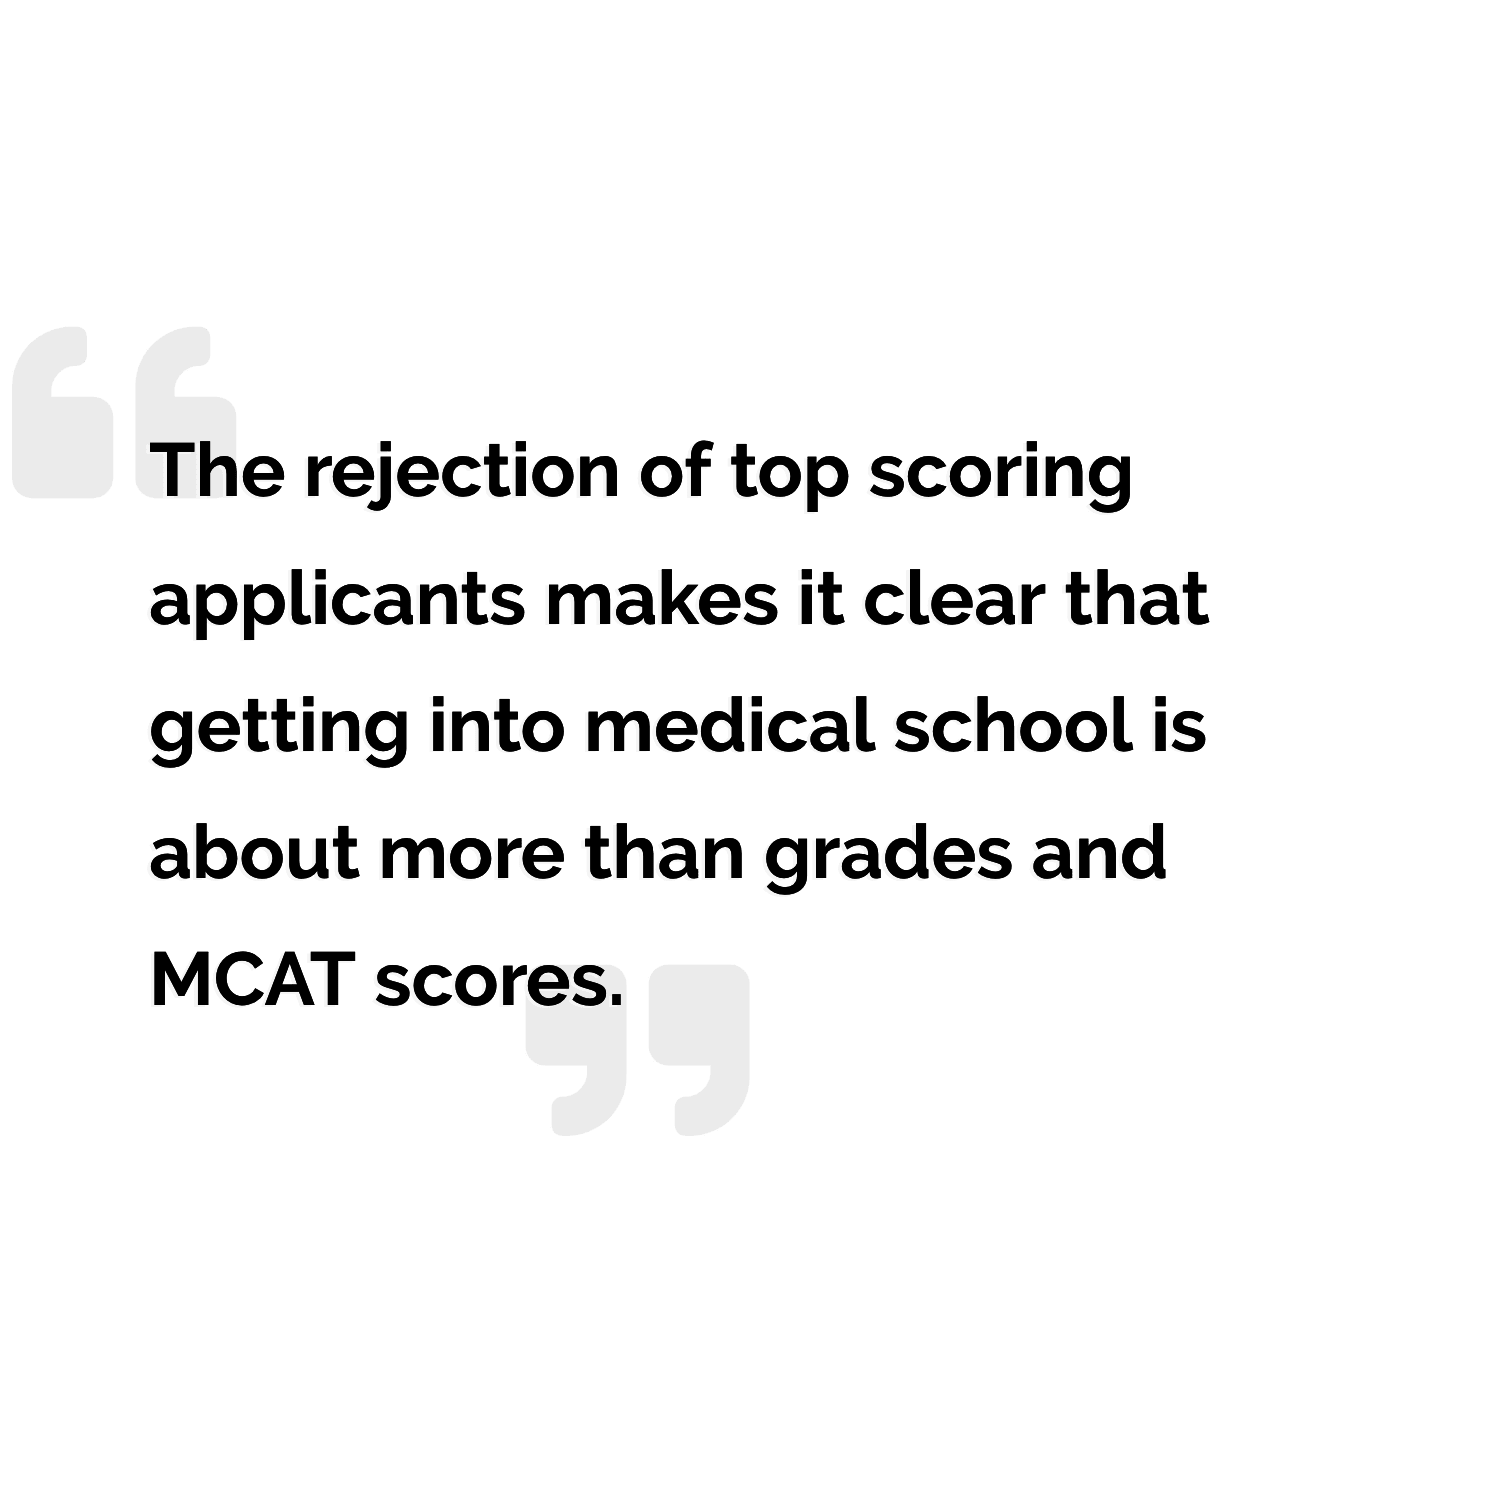 quote: getting into medical school is about more than grades and MCAT